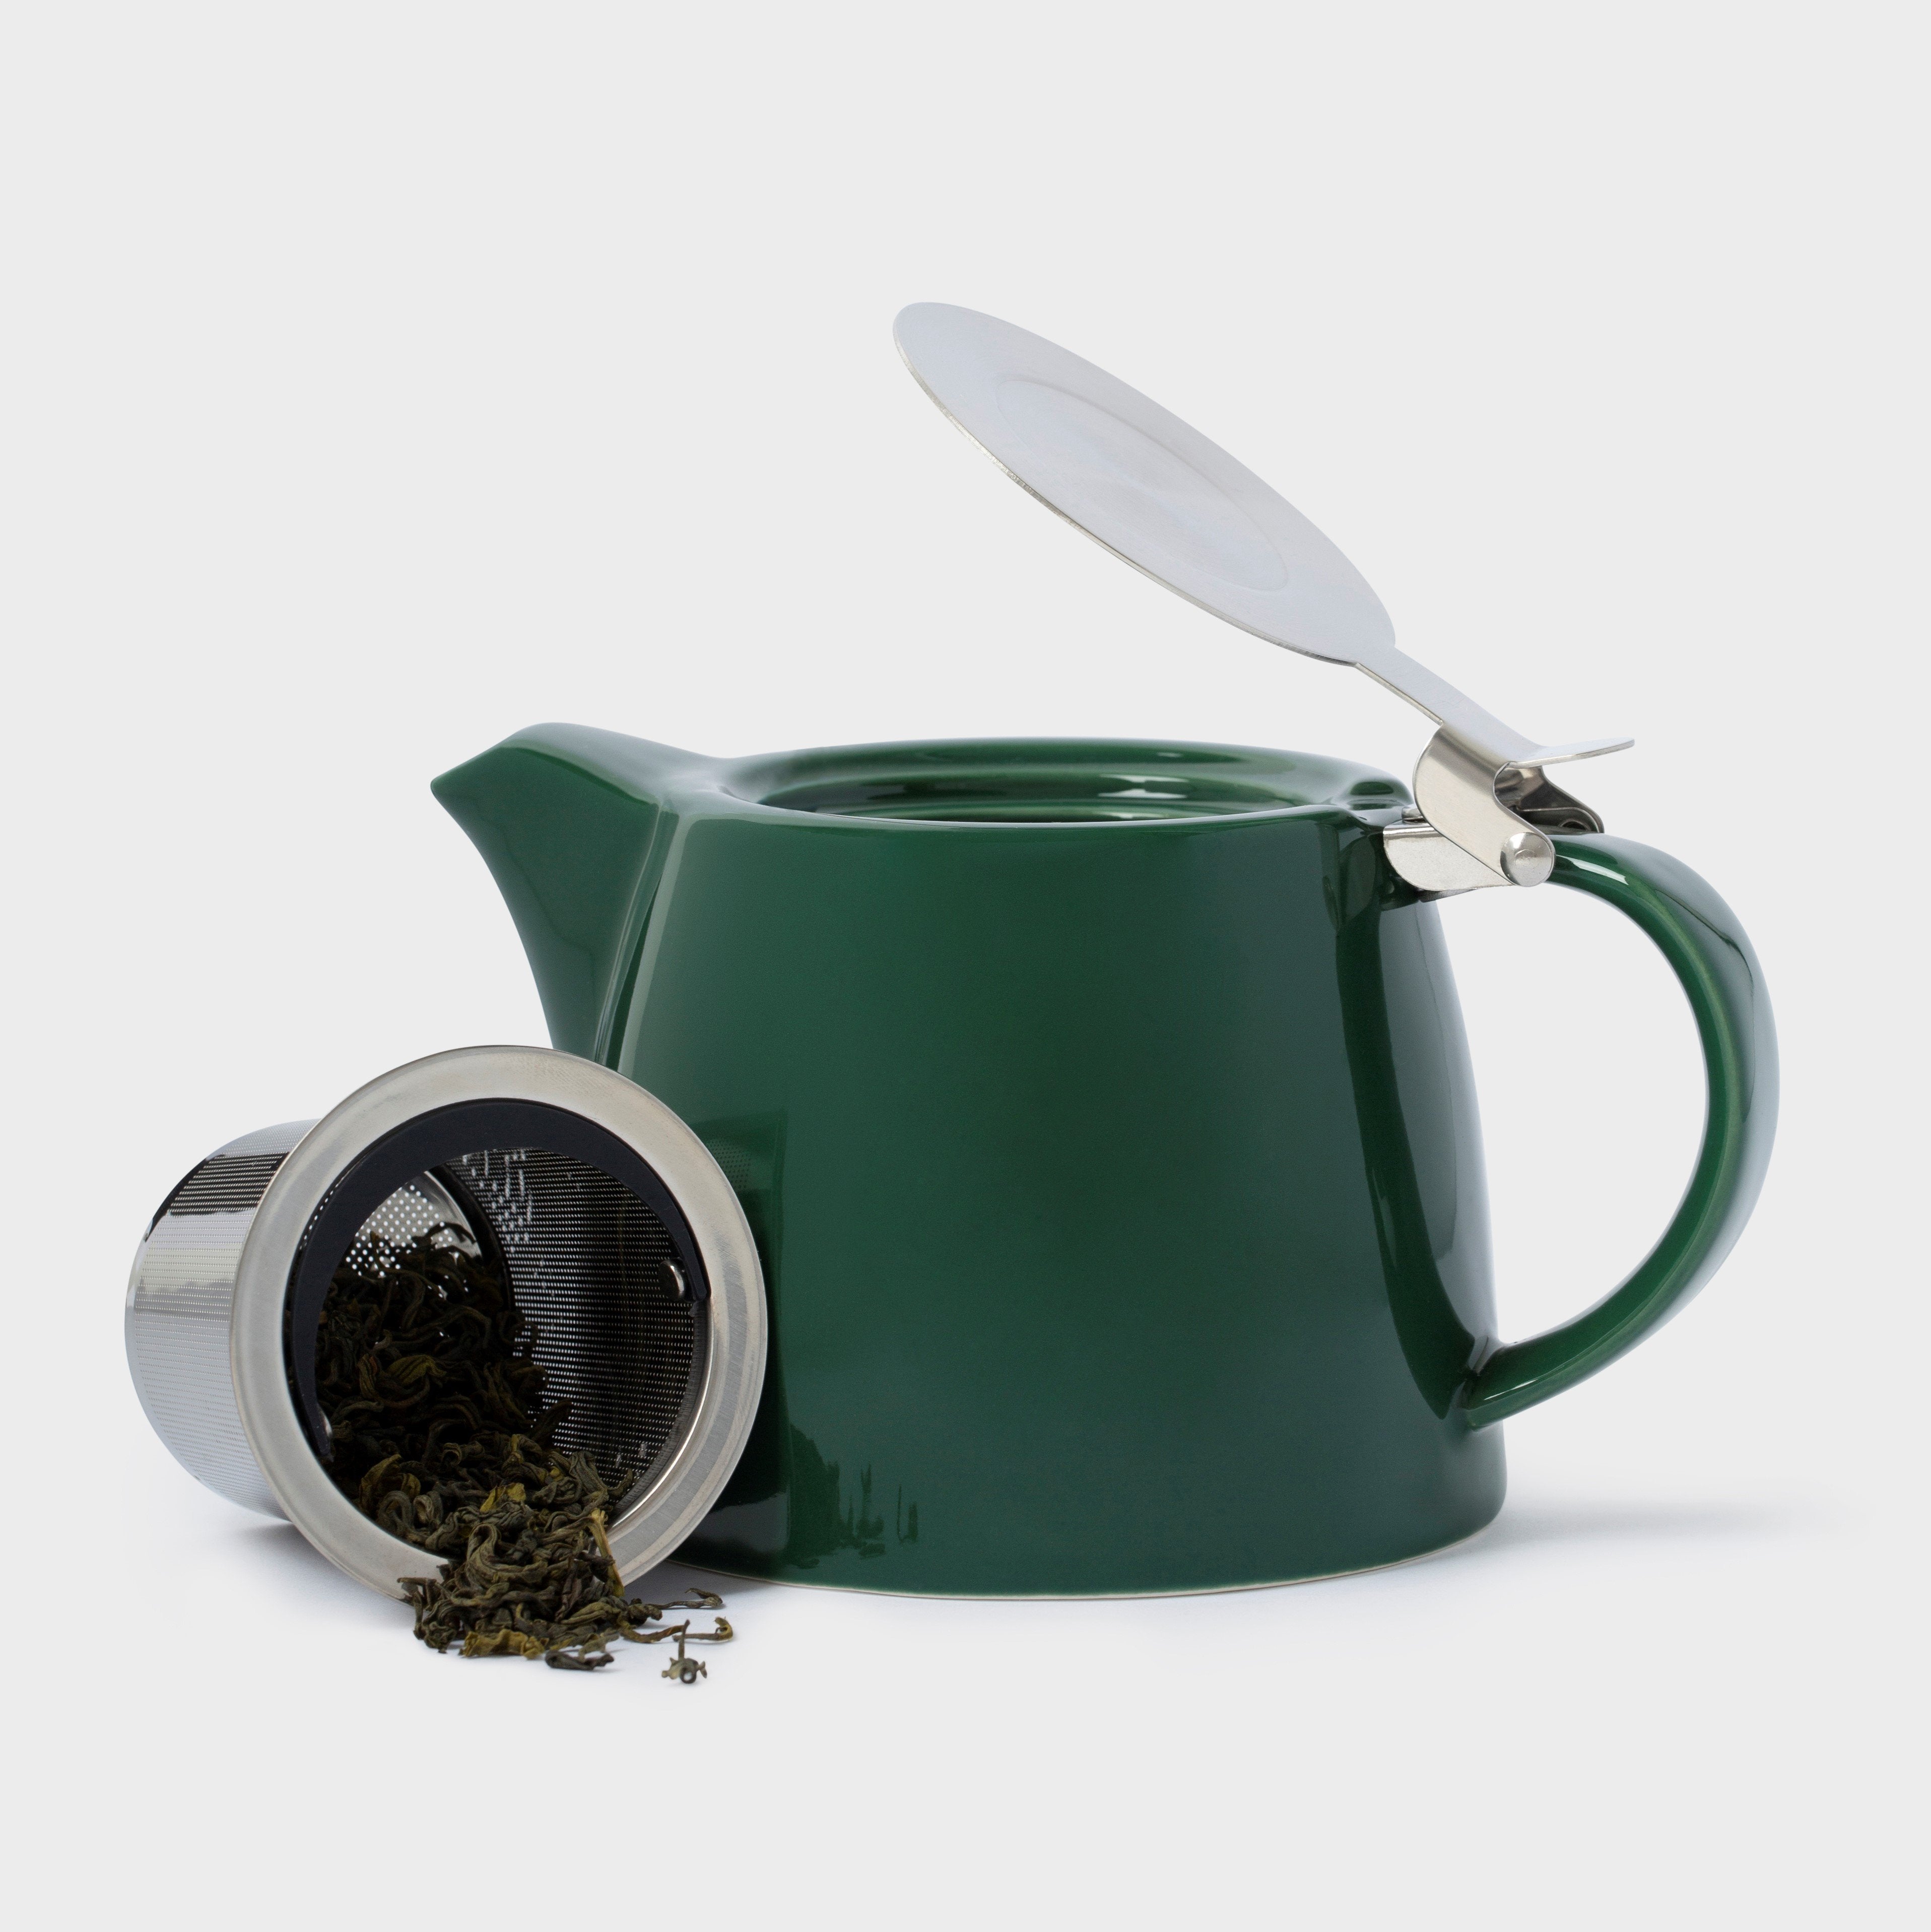 Gleam - Porcelain Teapot with Infuser, Image 7